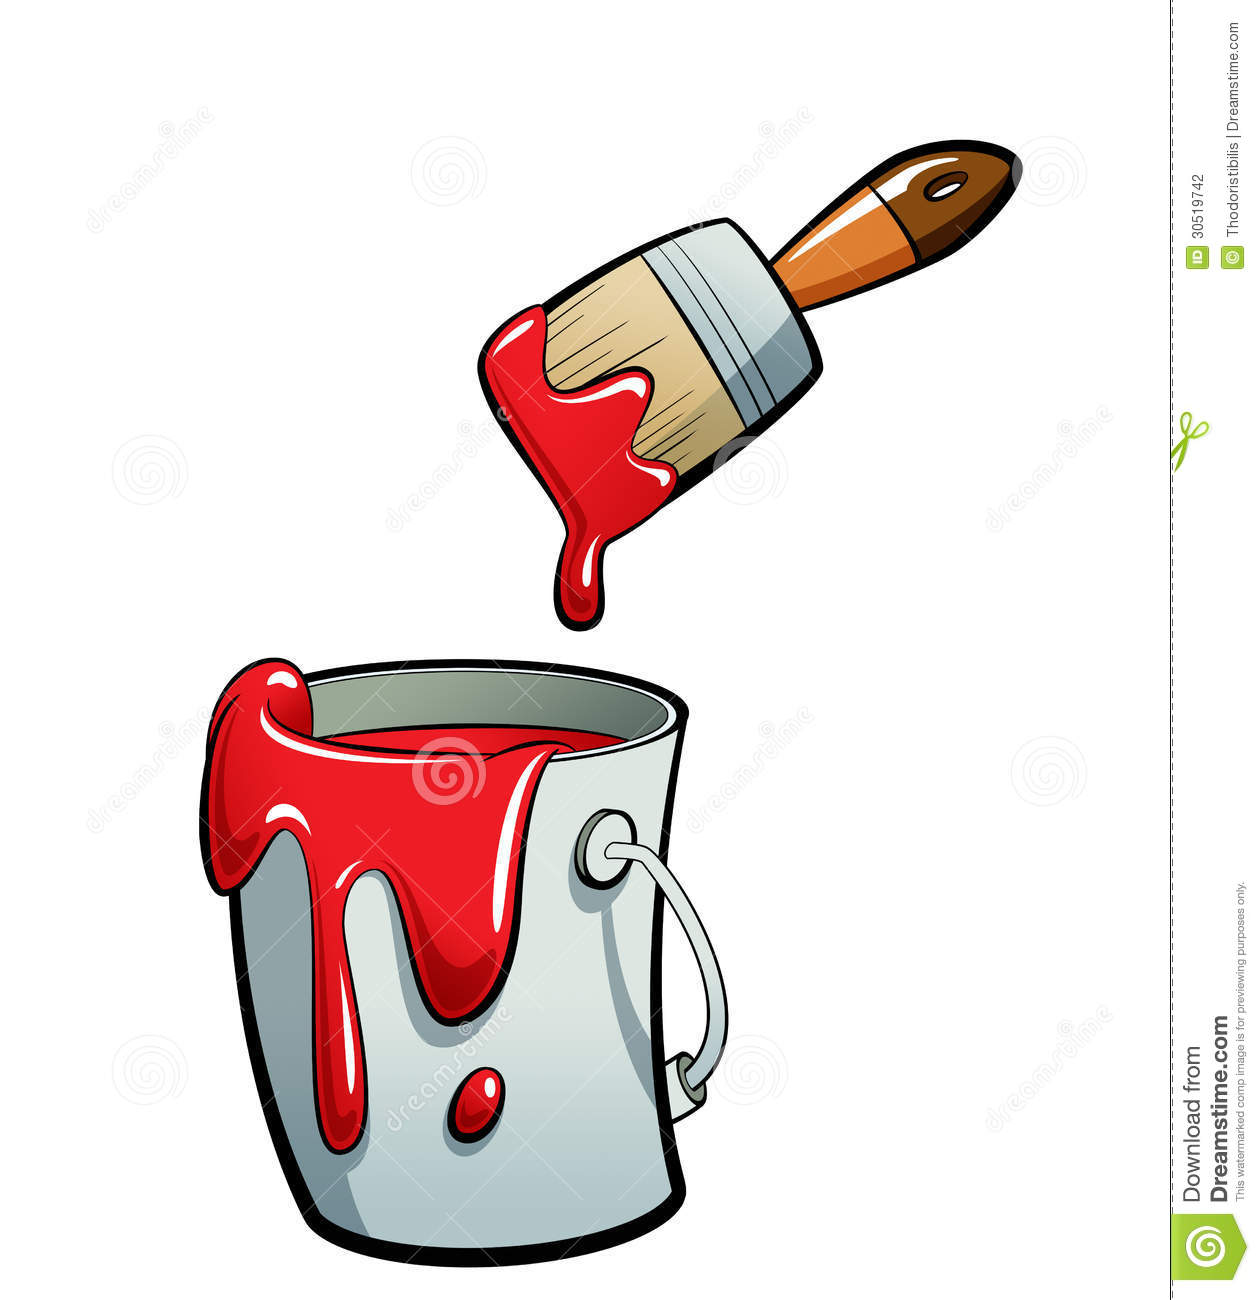 Paint Bucket And Brush Clip Art   Clipart Panda   Free Clipart Images